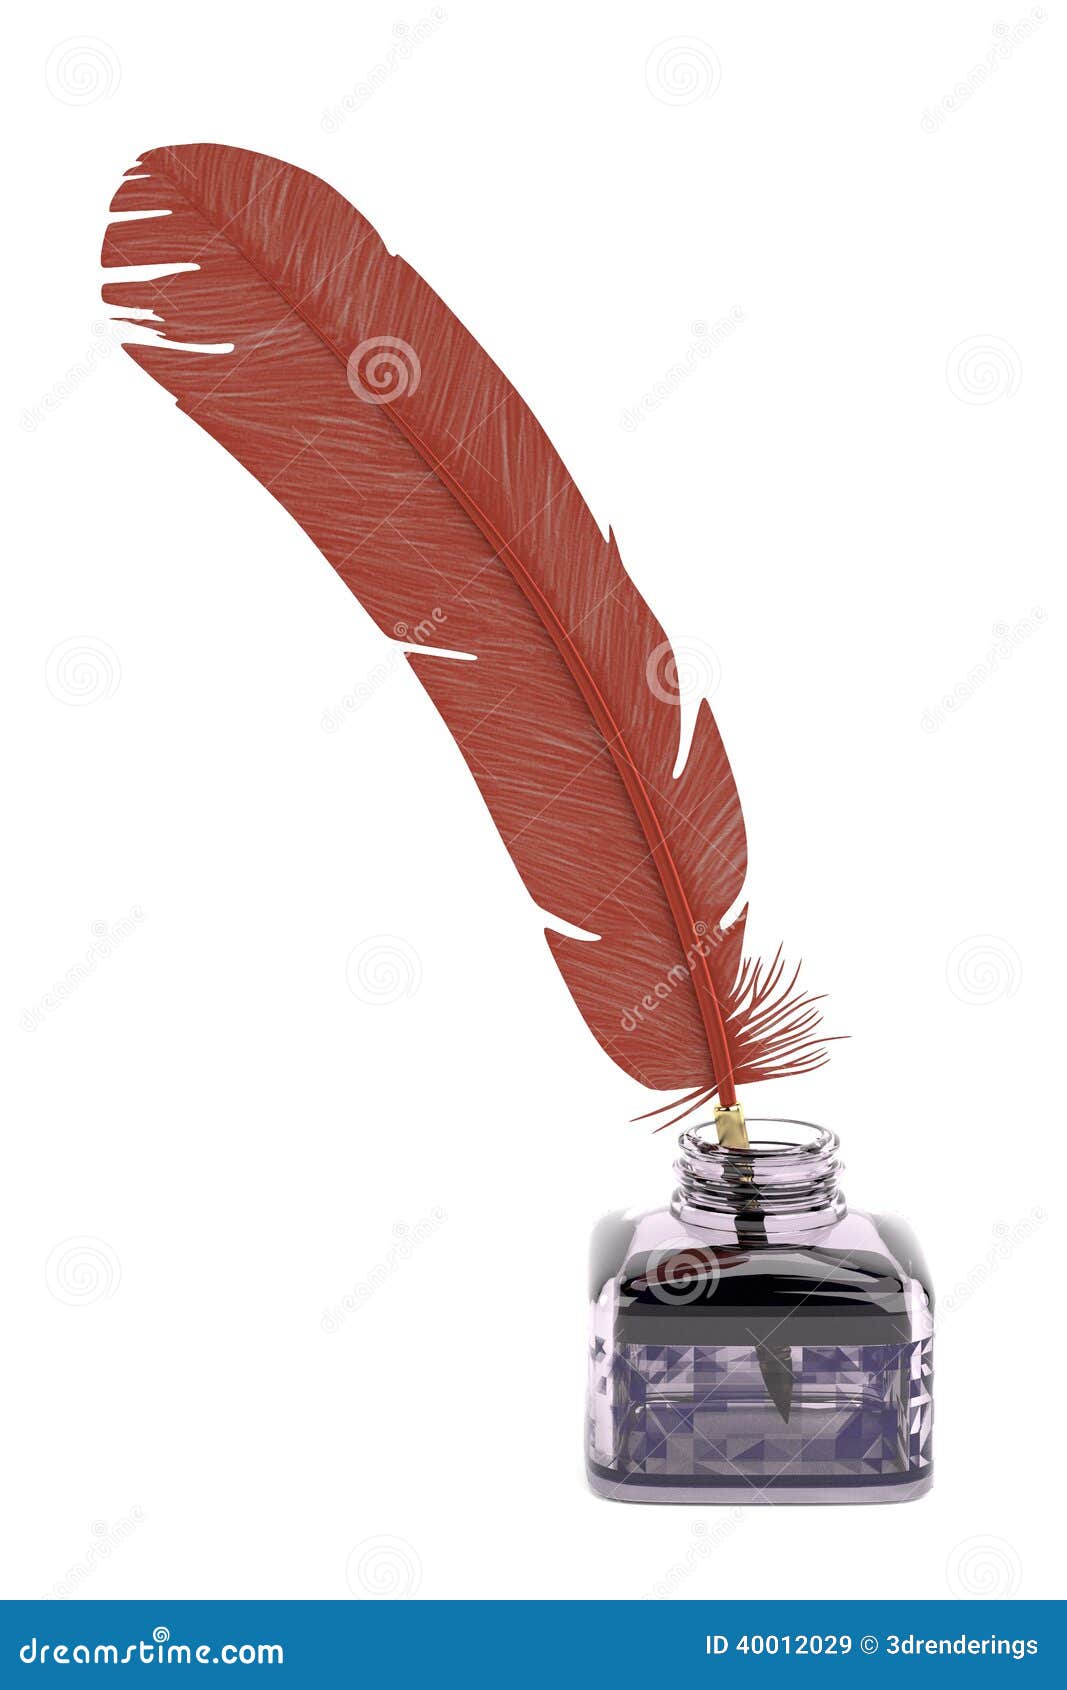 3d render of writing quill with inkpot